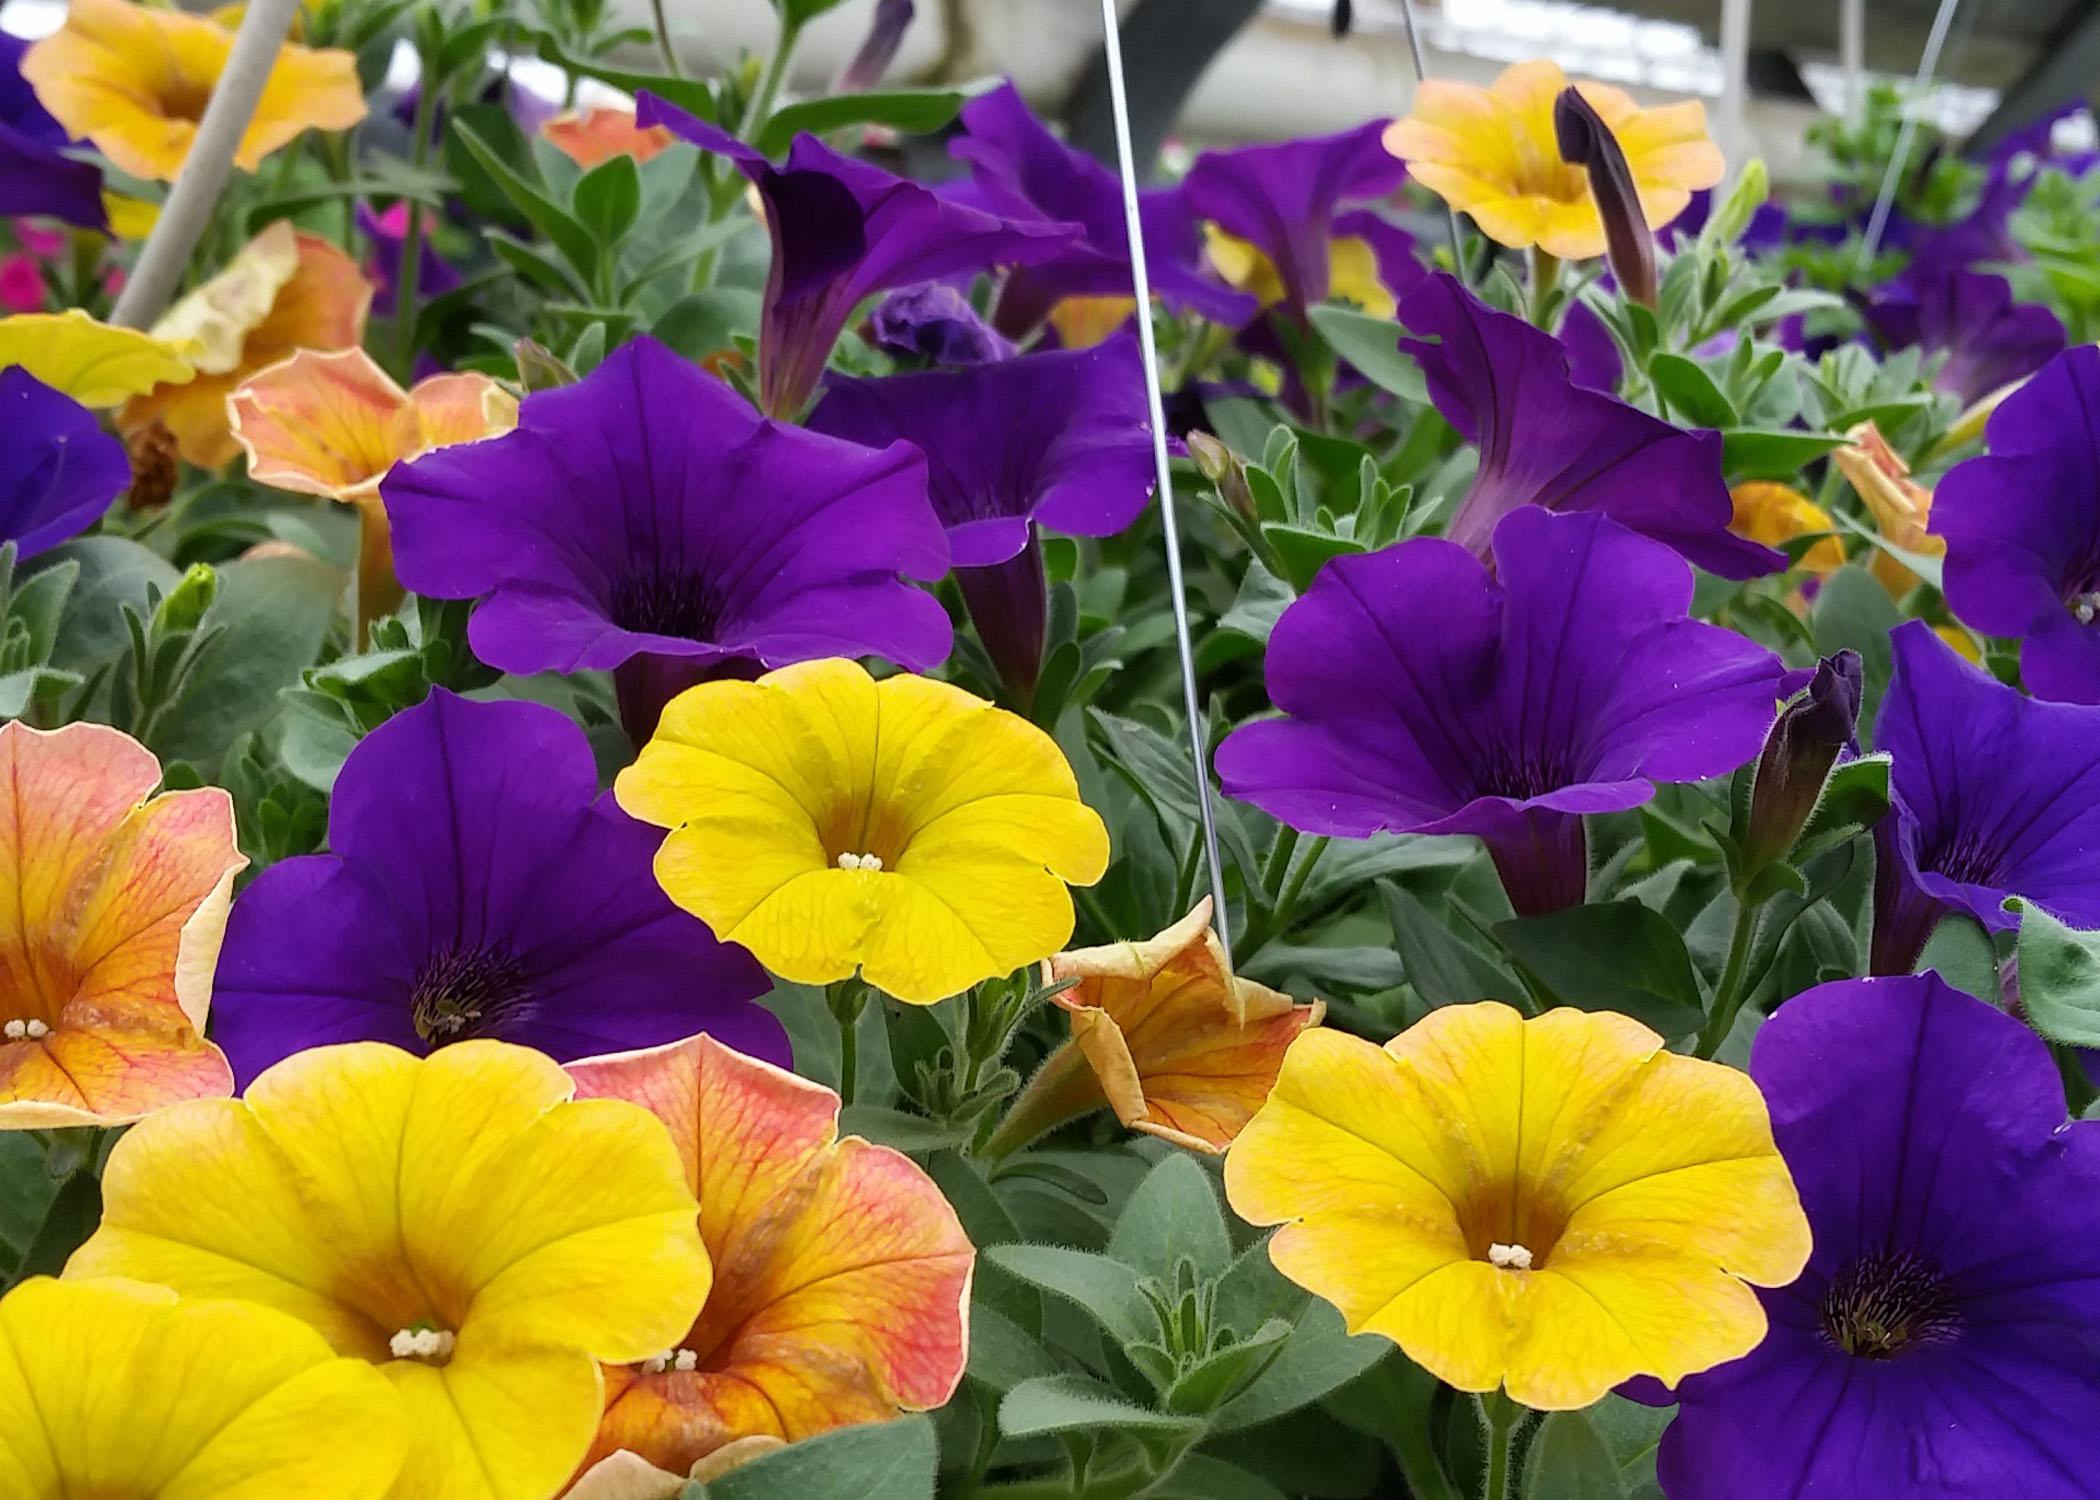 Yellow and purple flowers bloom from a green plant.